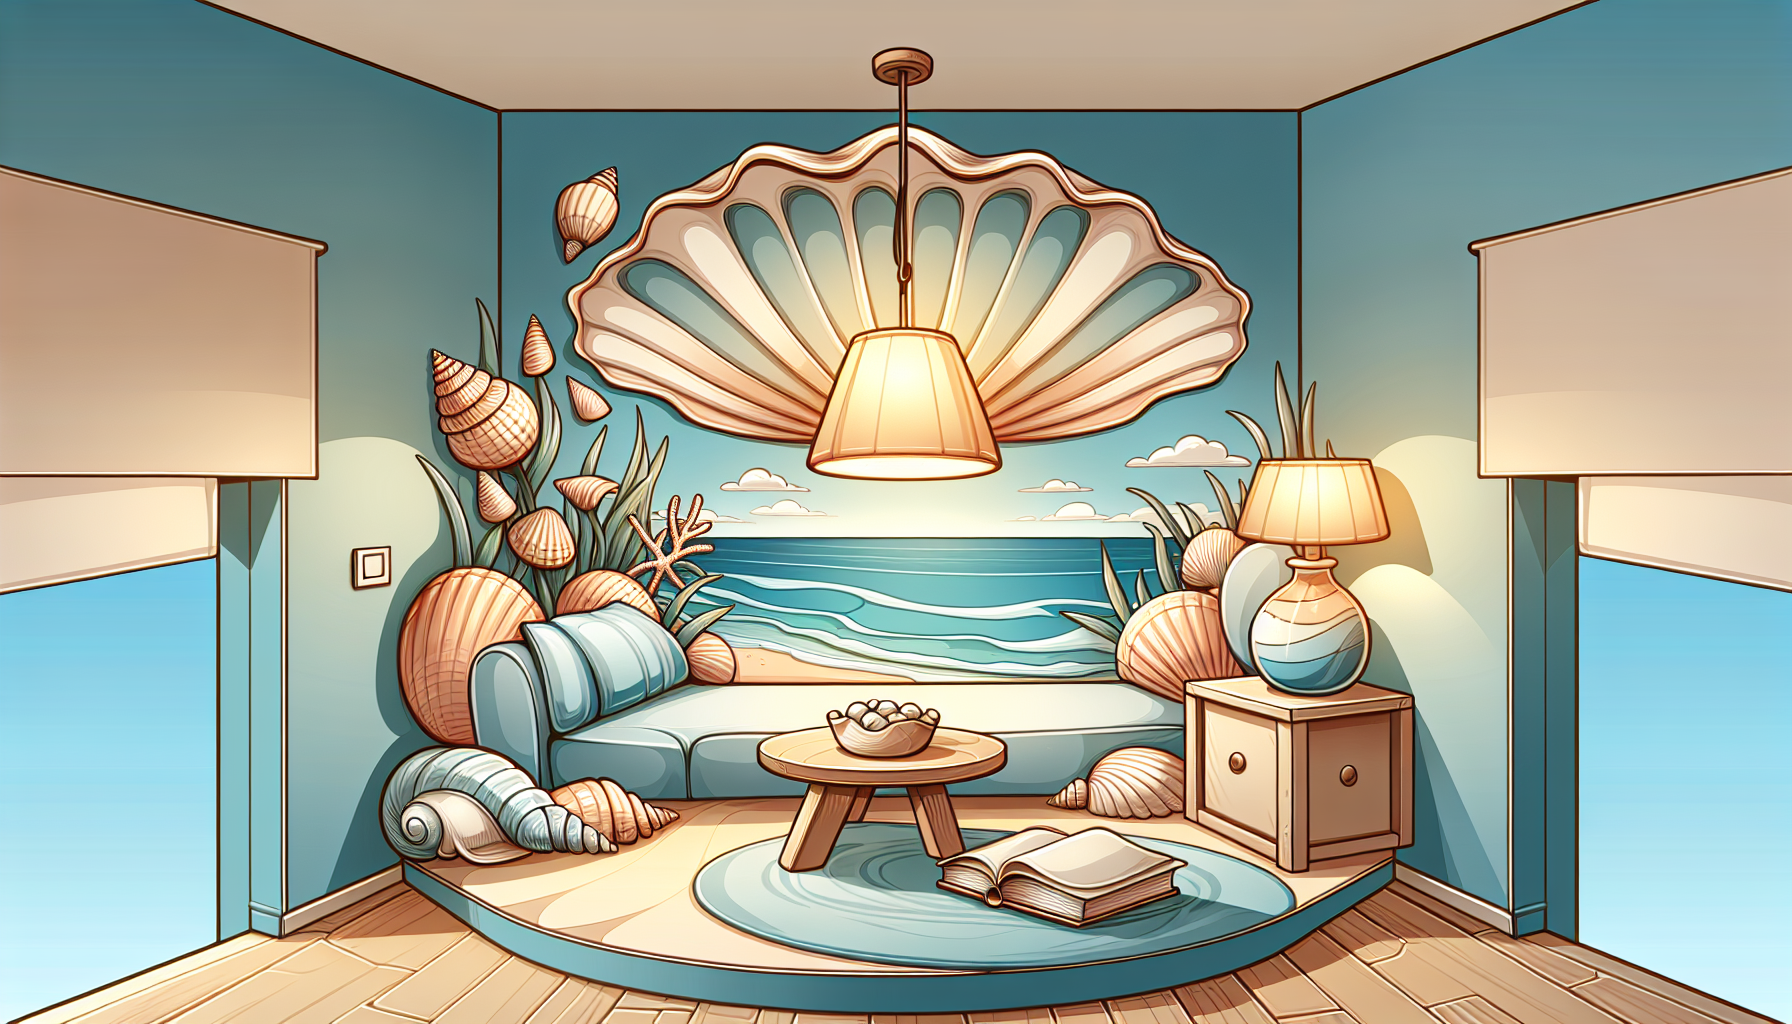 Large Sea Shells Wholesale | Cartoon depiction of a beach-themed room with large seashells as decor